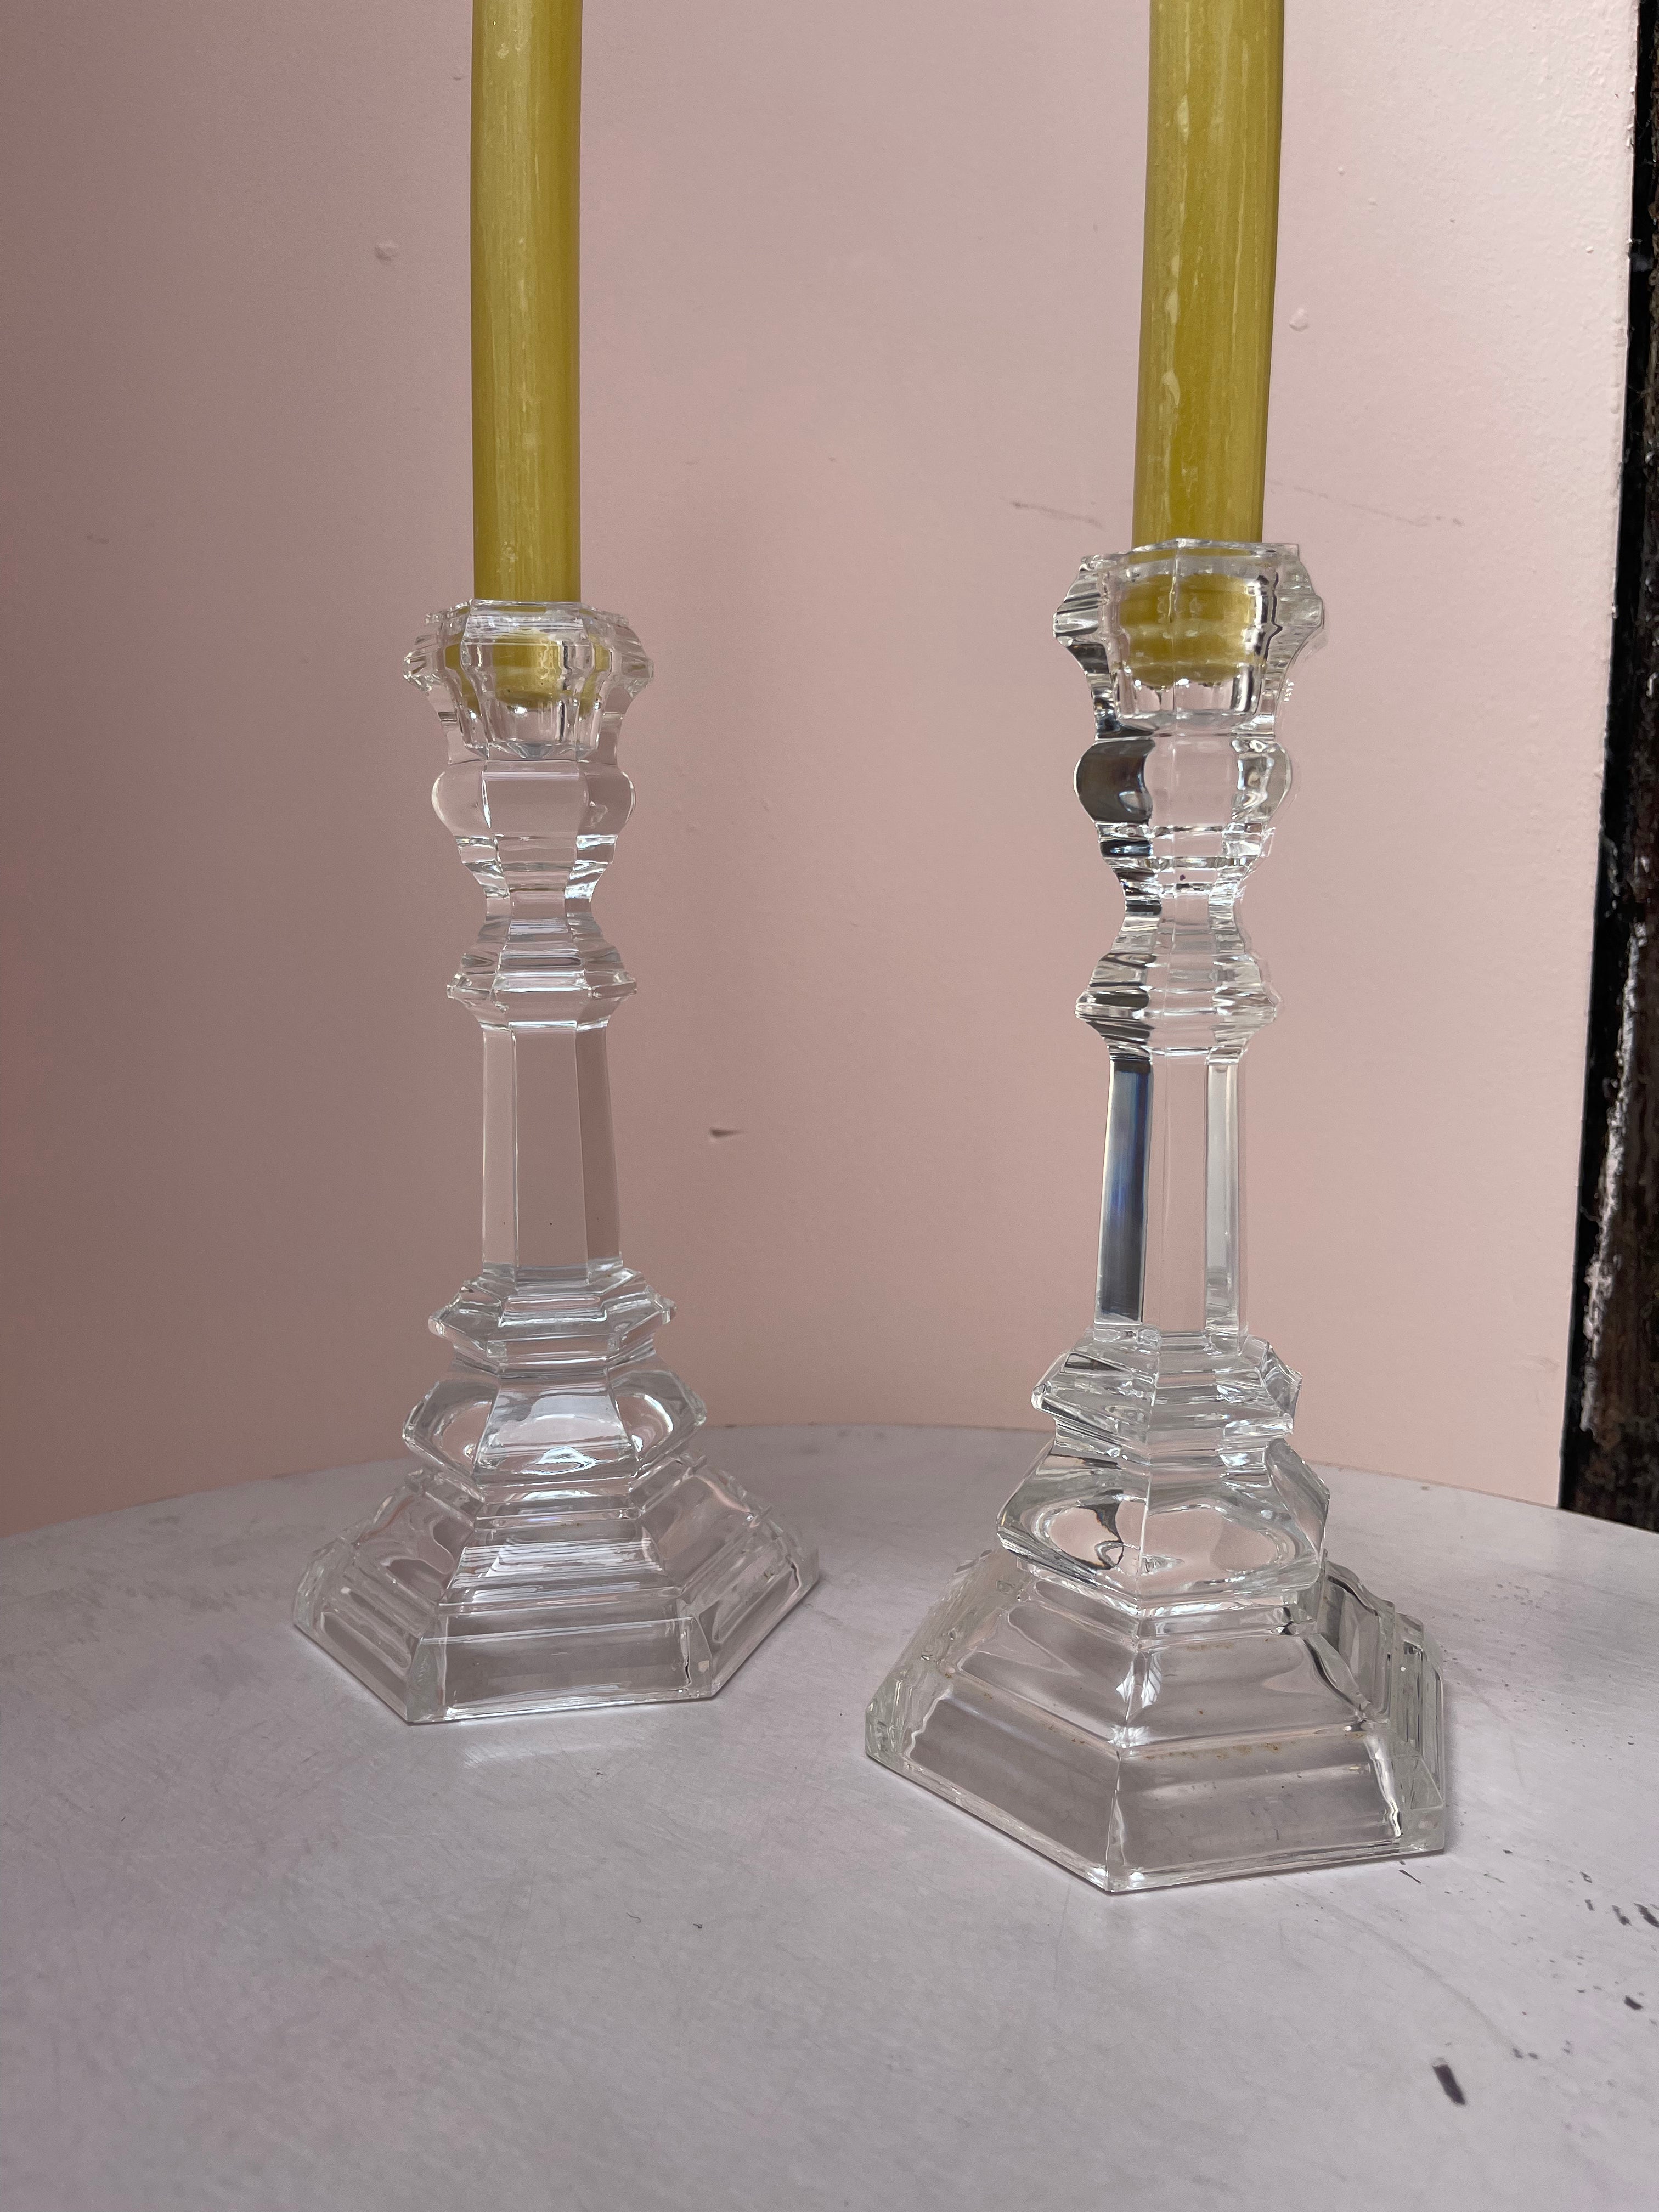 Pair of Rockwell Crystal Candlesticks